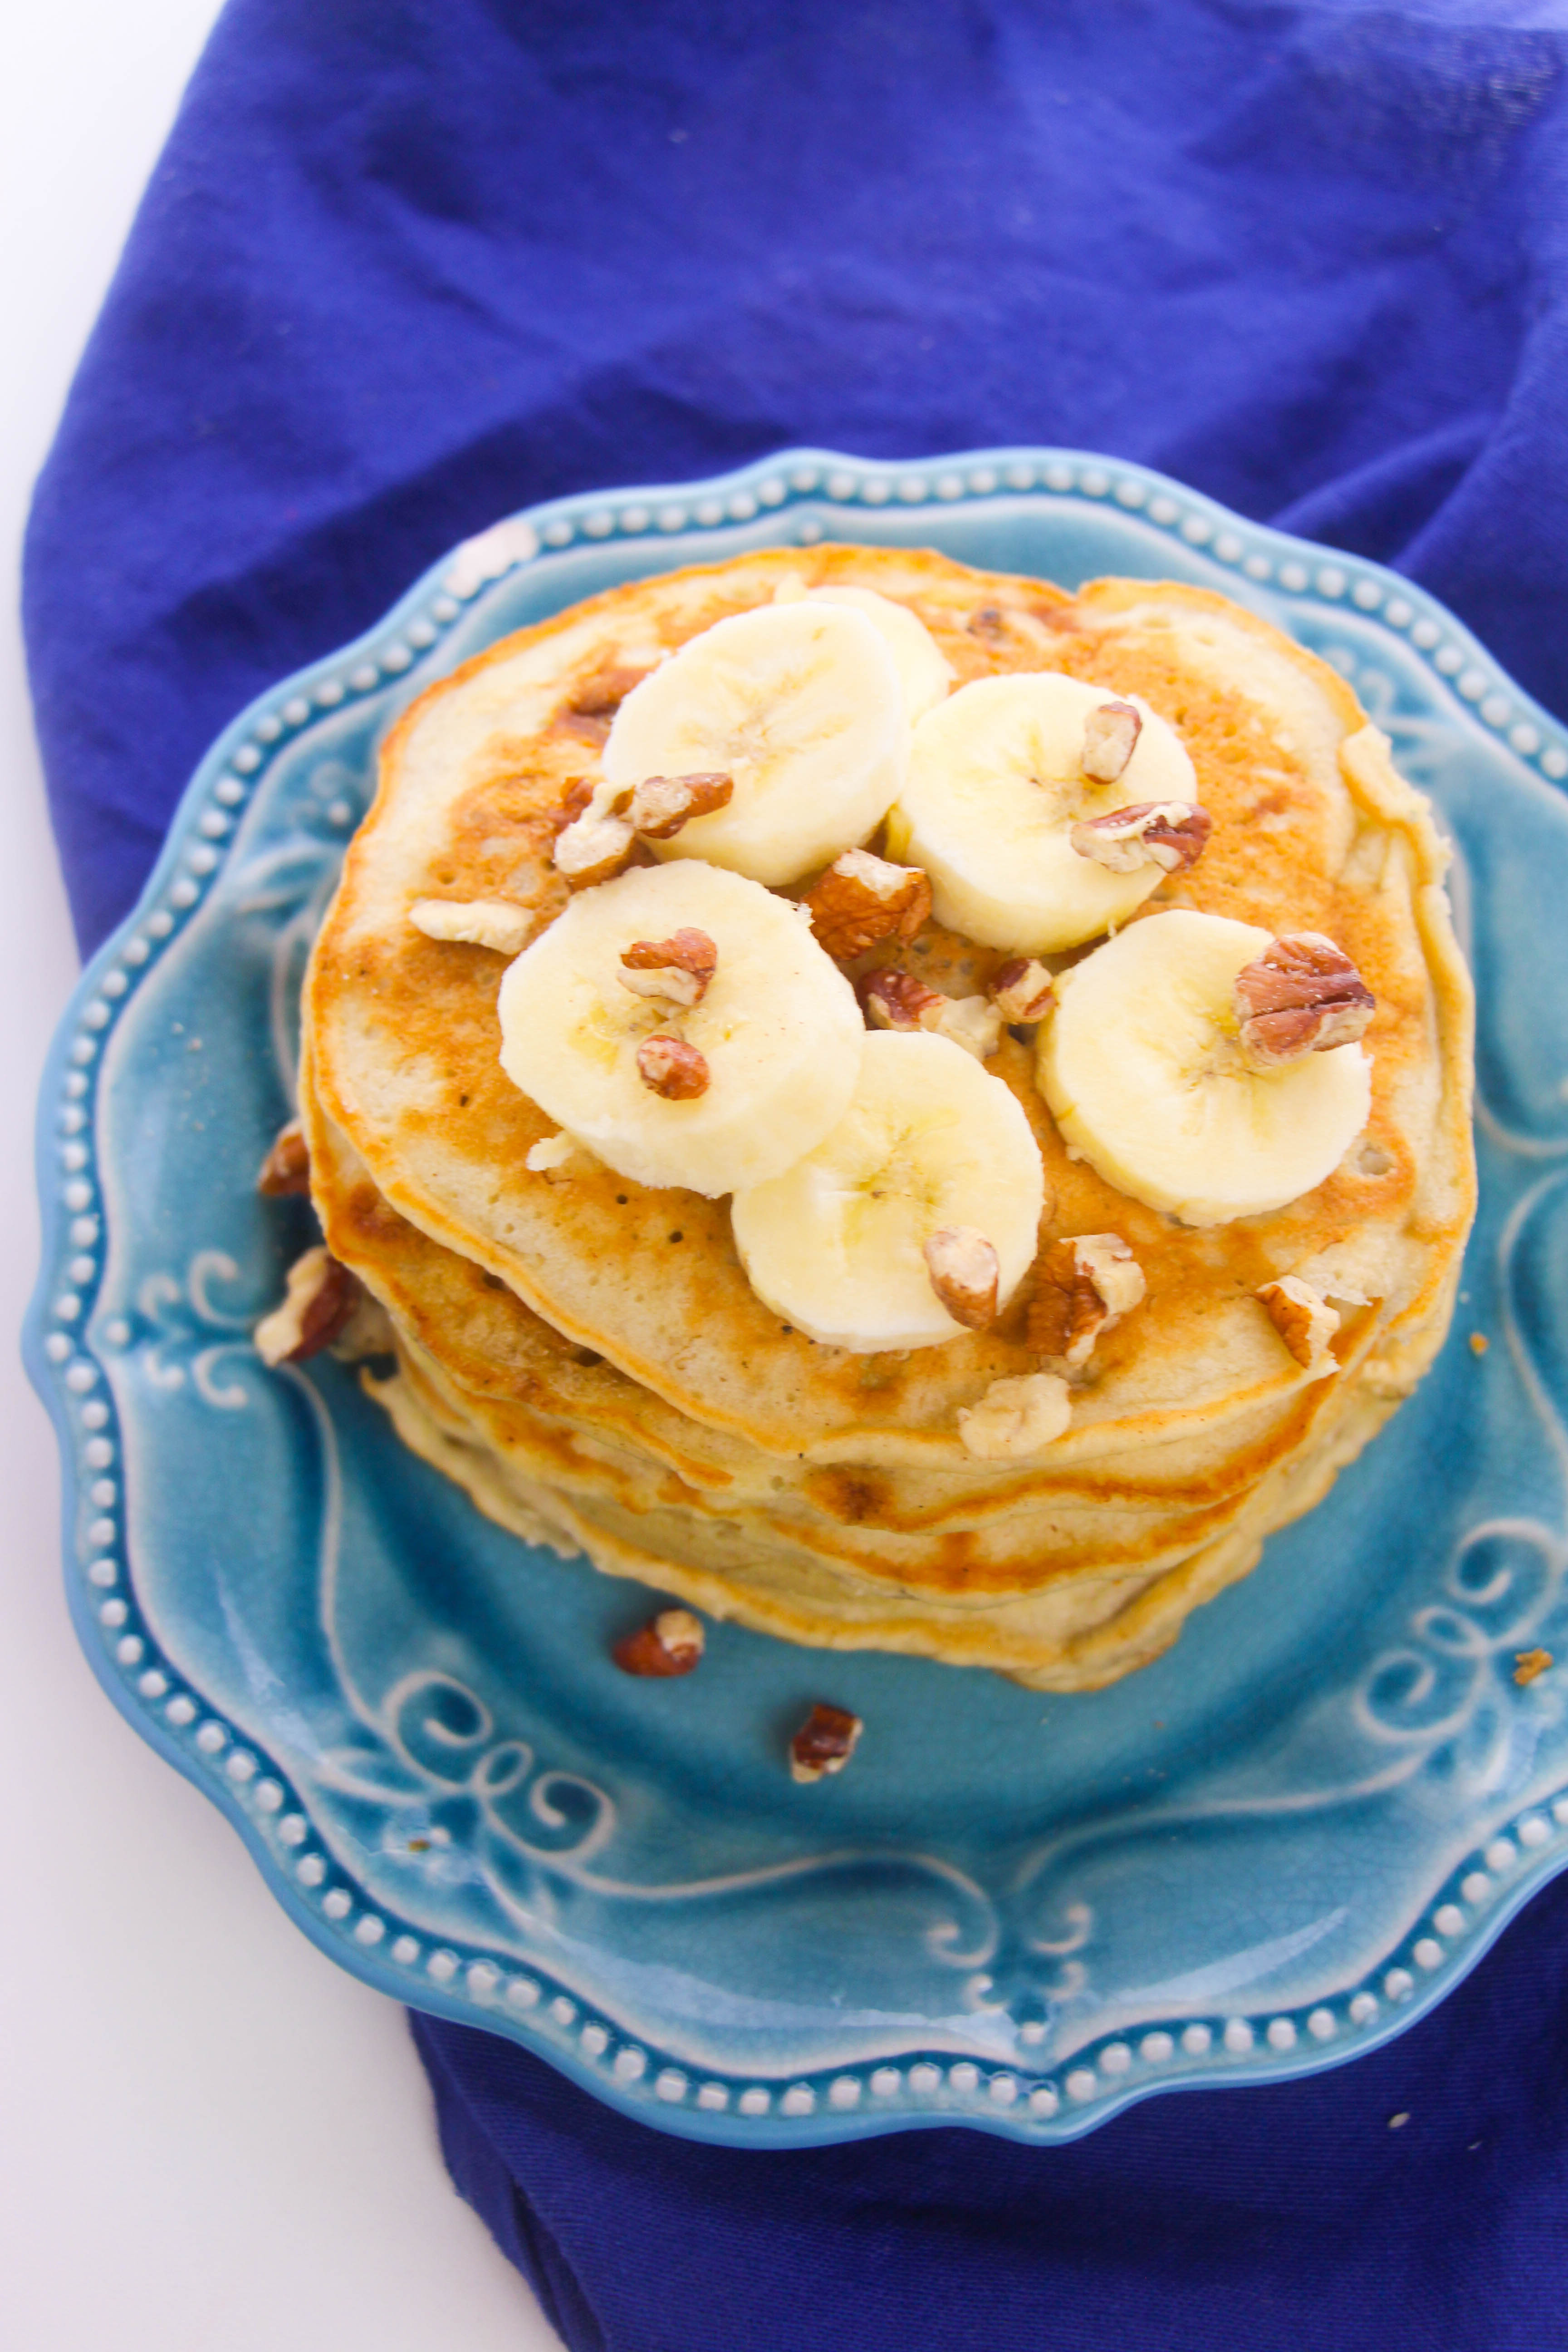 Banana Nut Pancakes: A Fluffy and Nutty Breakfast Delight